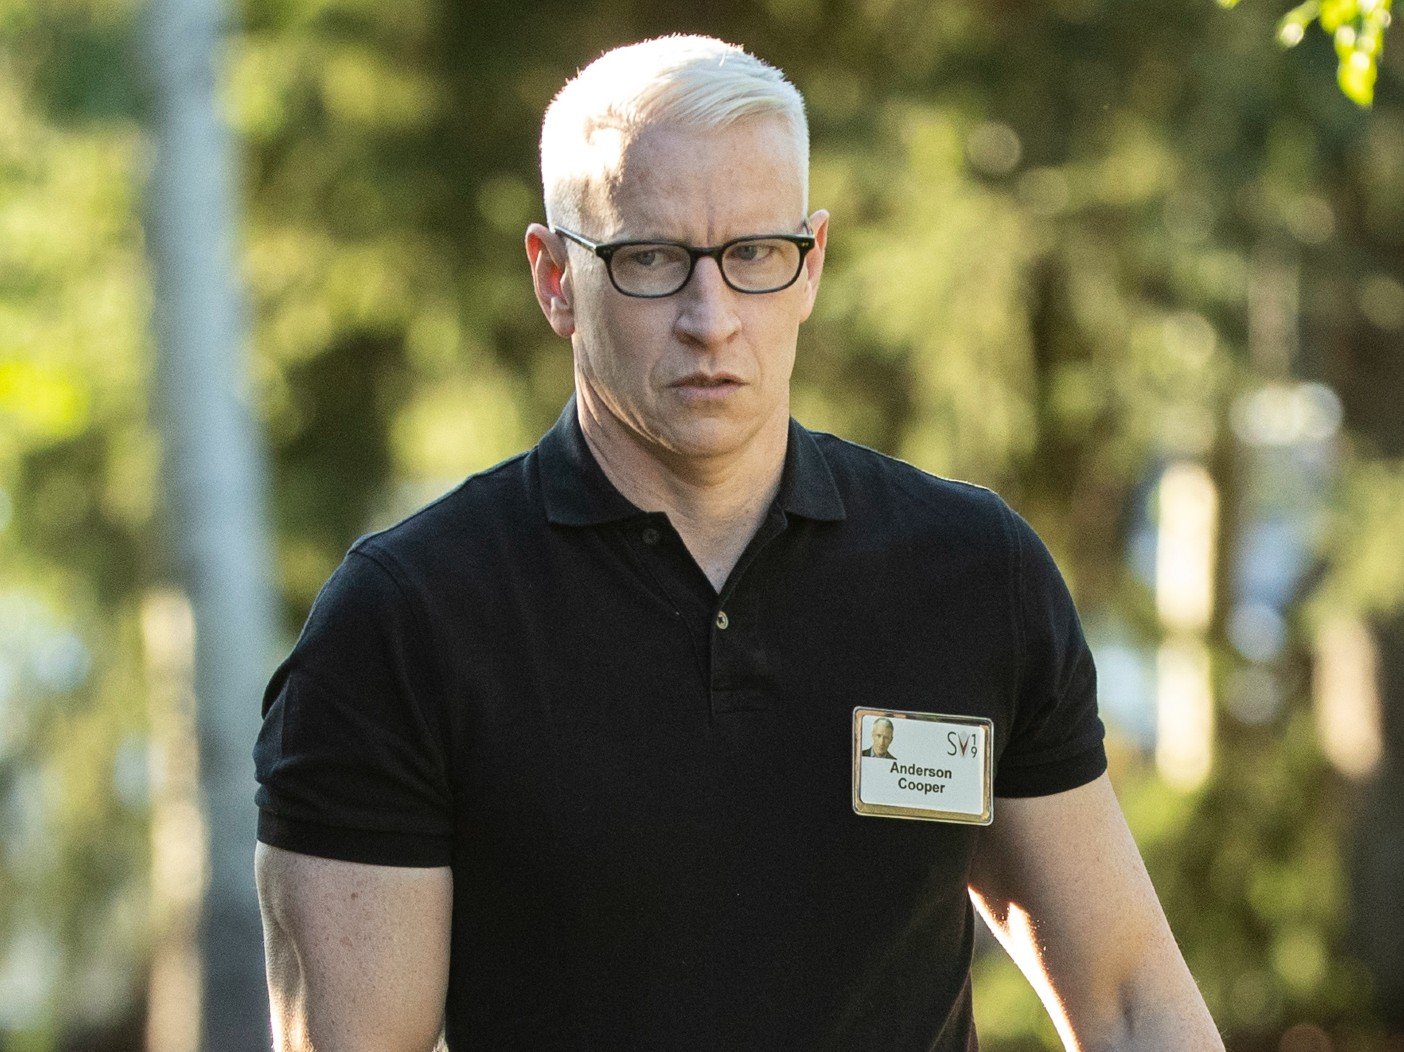 Industry gossip claims Anderson Cooper is being pushed out by new CNN Boss